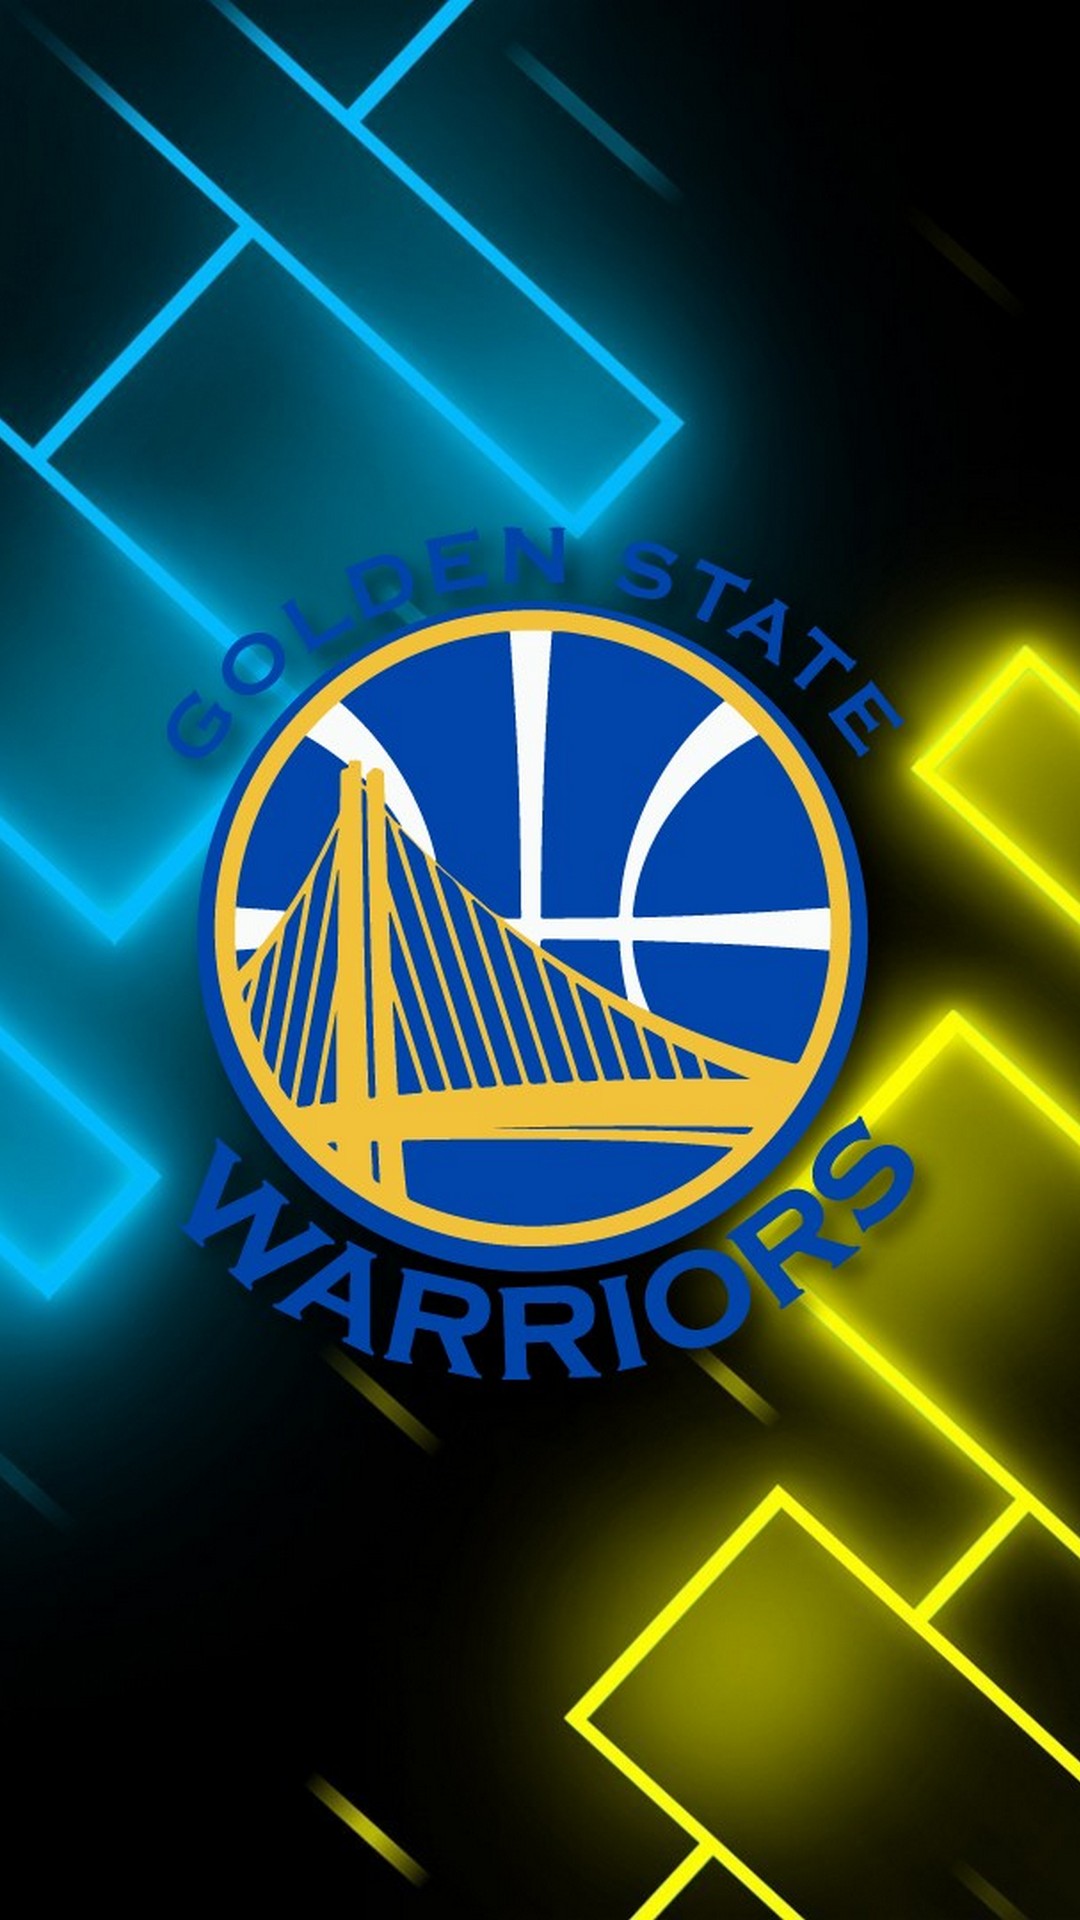 Golden State Warriors iPhone 6 Wallpaper with image resolution 1080x1920 pixel. You can use this wallpaper as background for your desktop Computer Screensavers, Android or iPhone smartphones